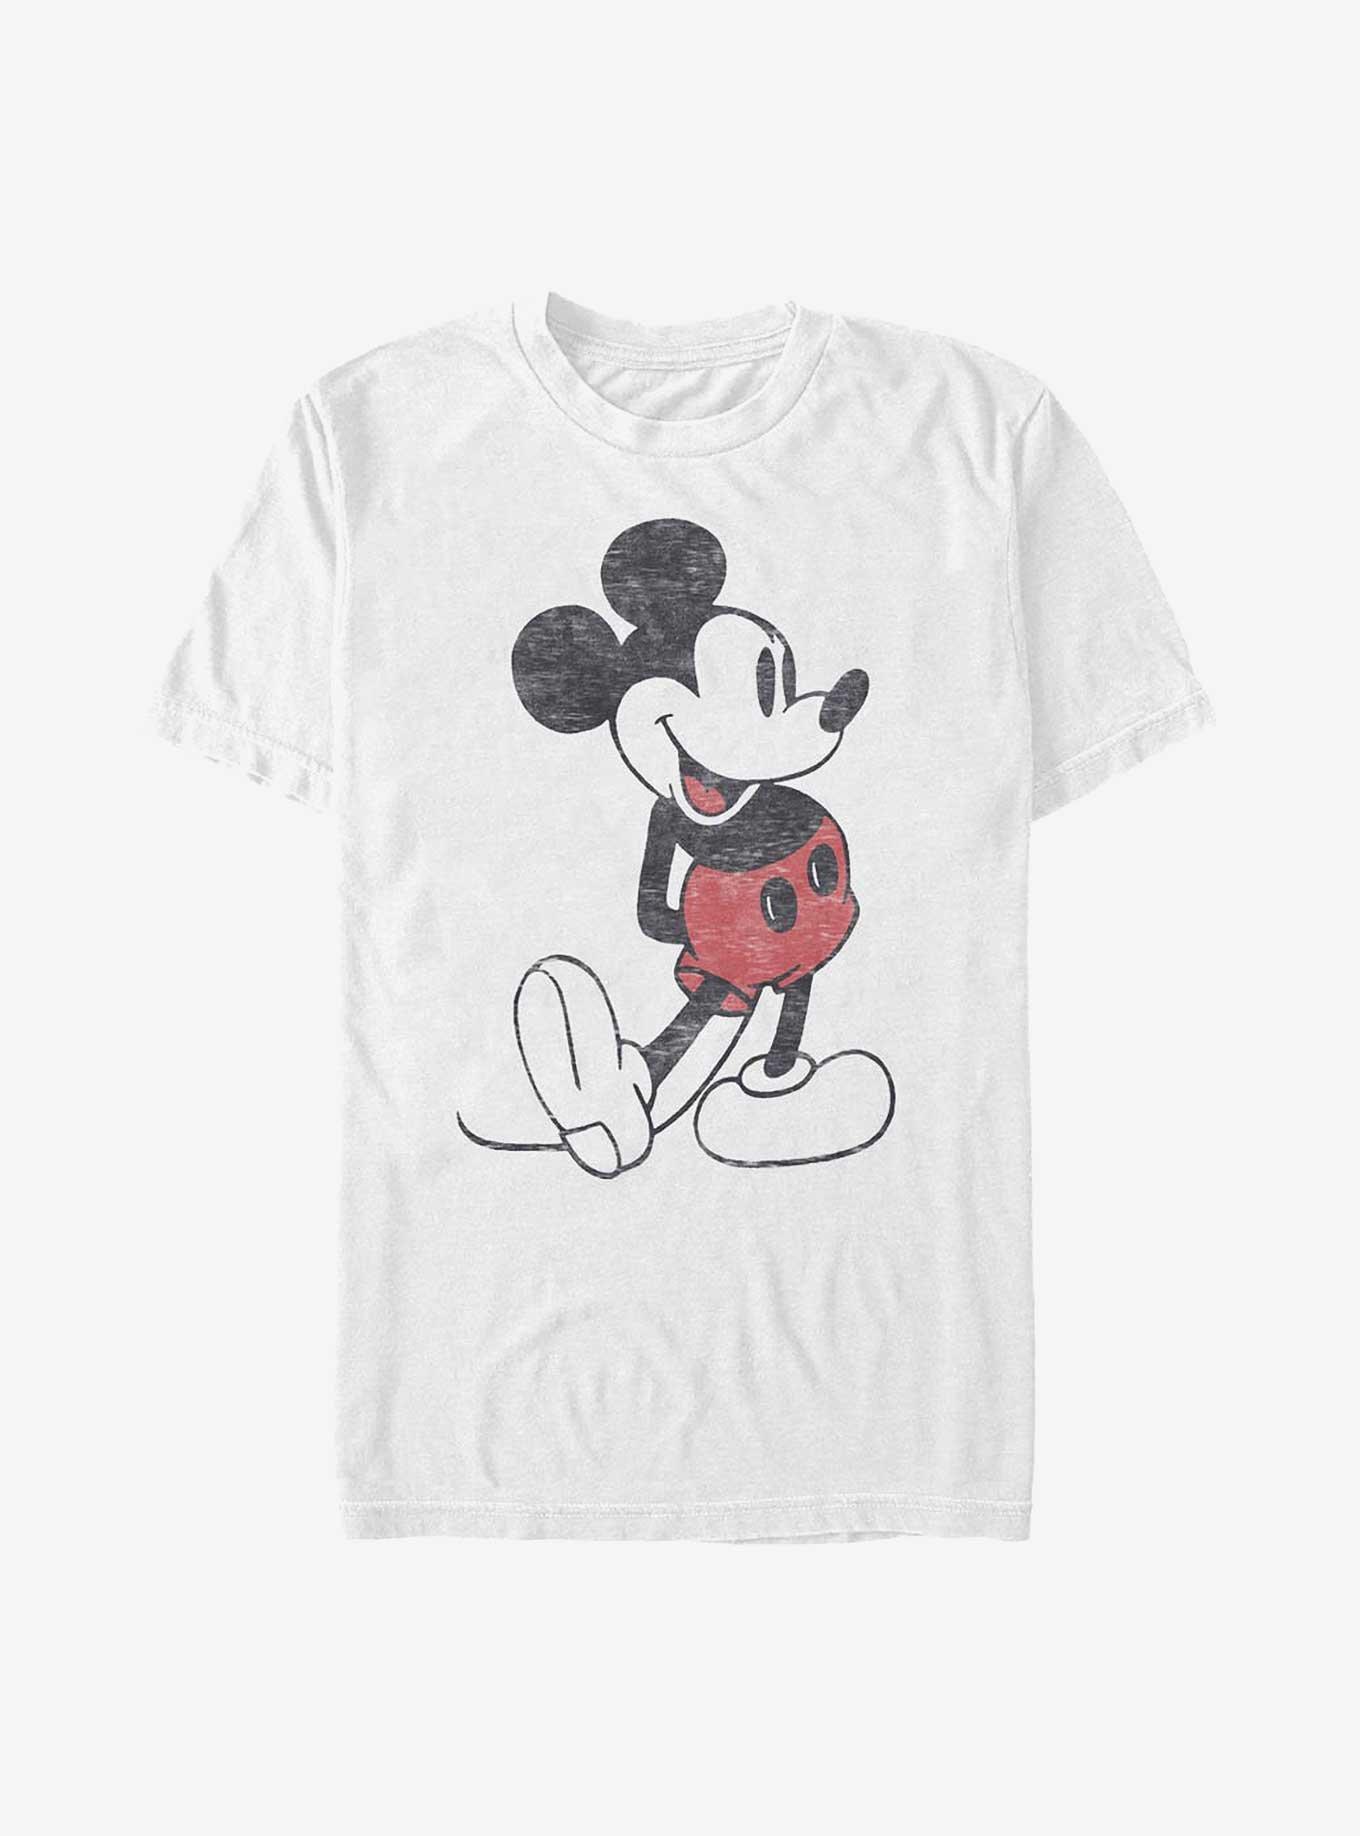 Disney Mickey Mouse Vintage Classic T-Shirt